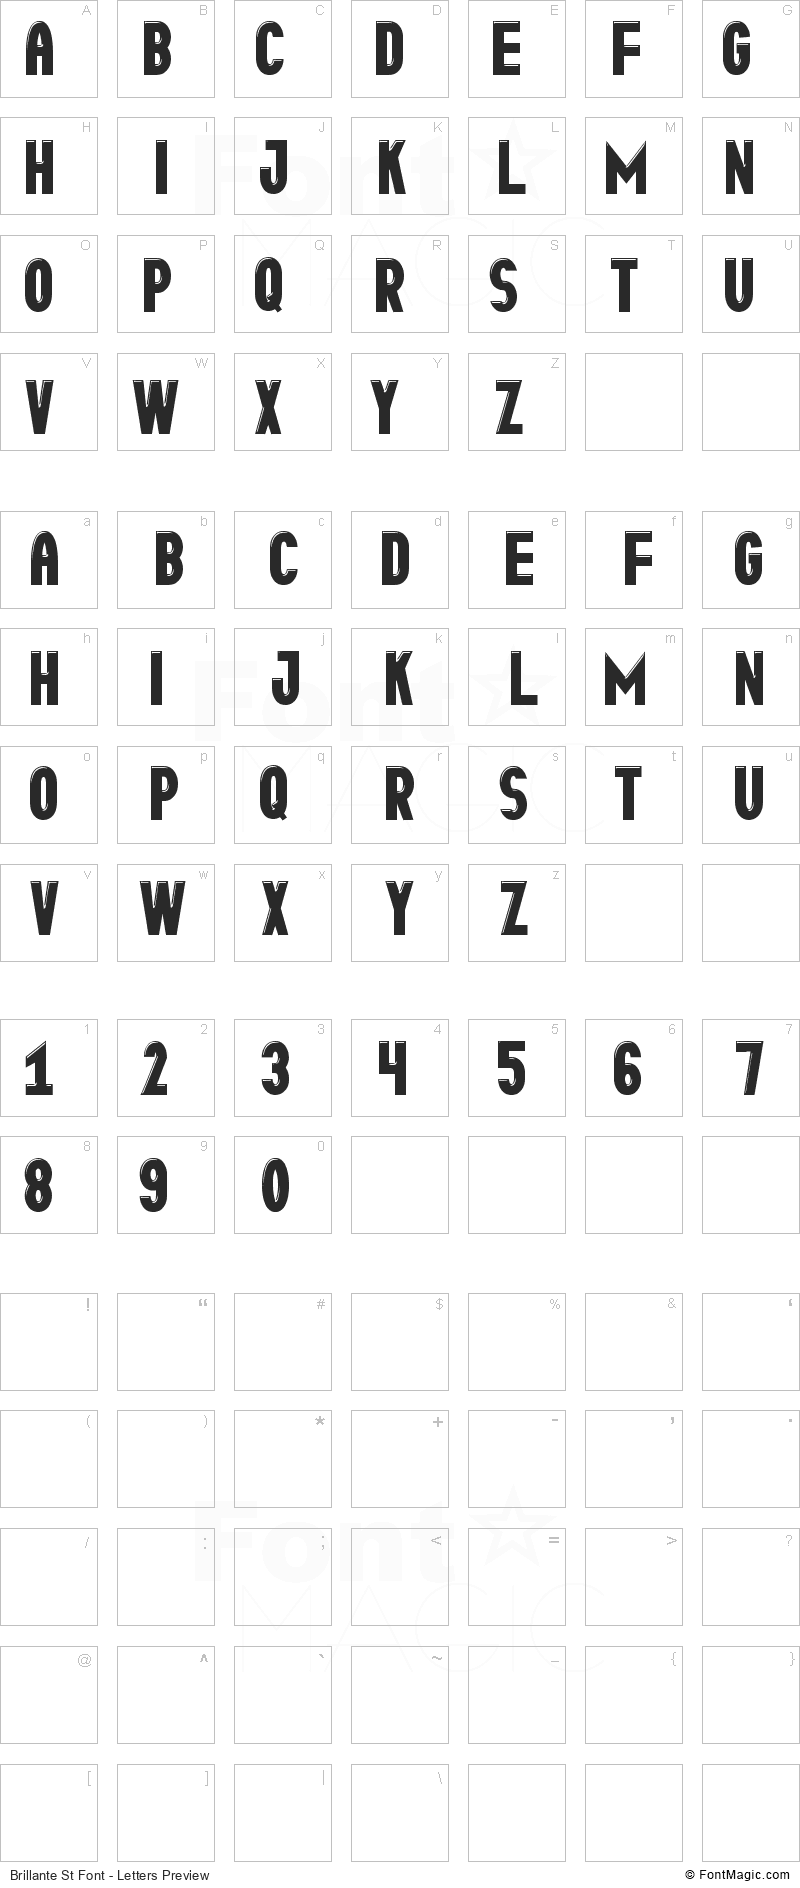 Brillante St Font - All Latters Preview Chart